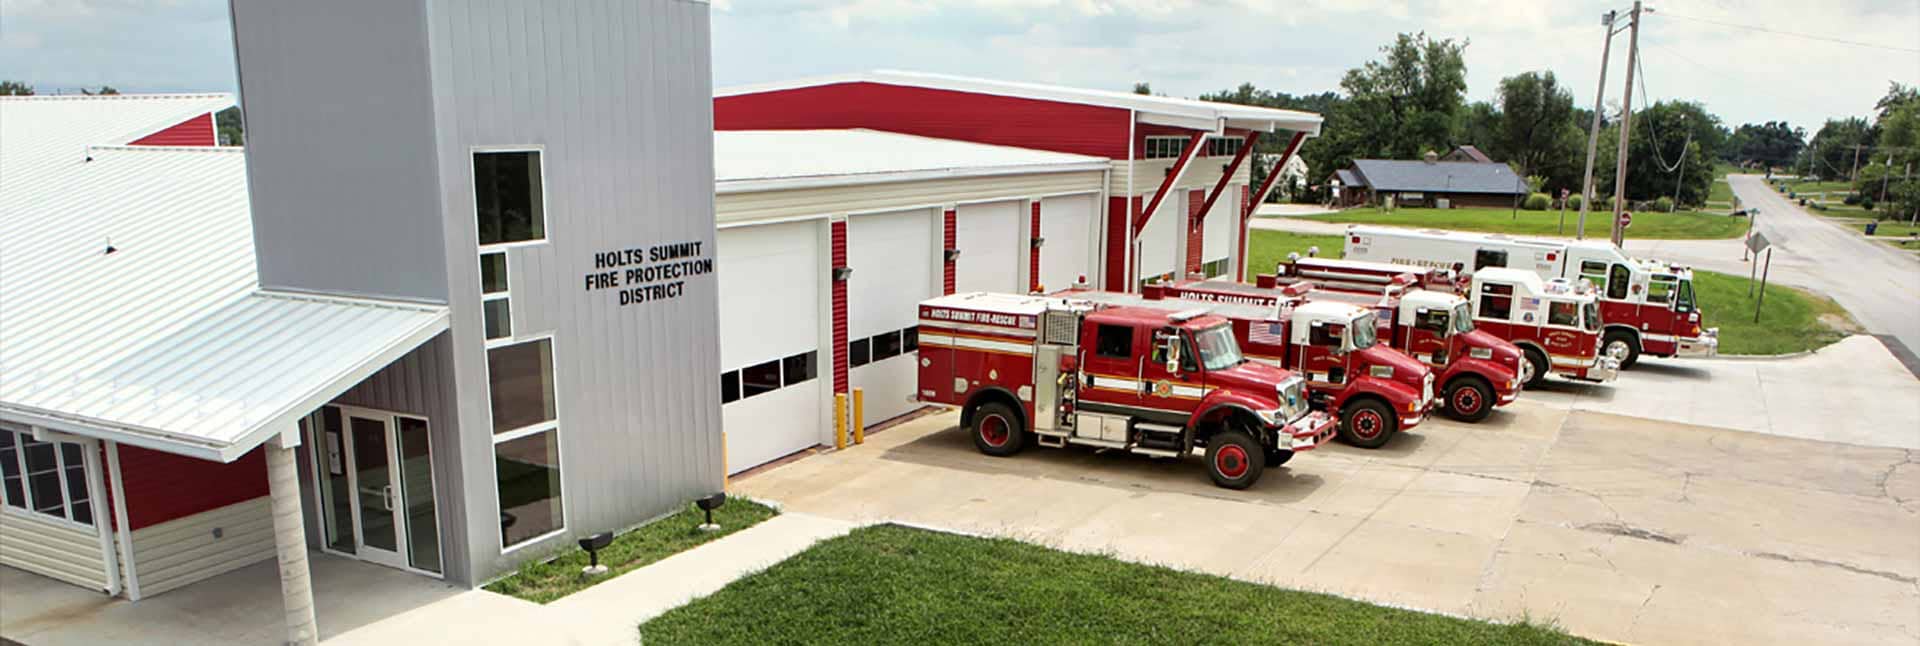 Holts Summit Fire Station